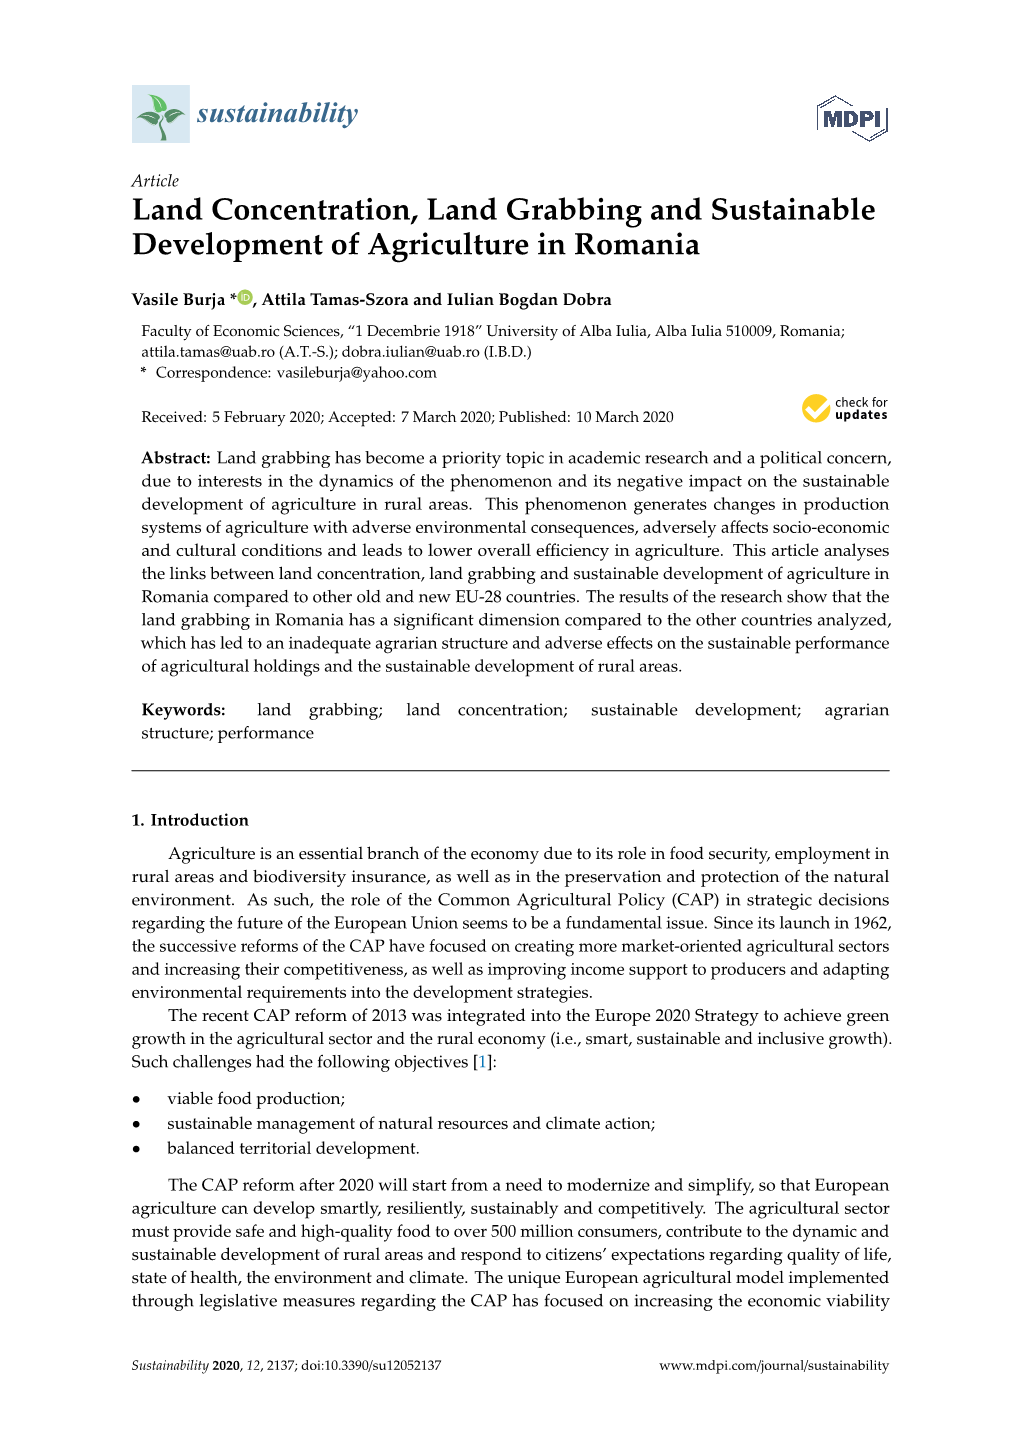 Land Concentration, Land Grabbing and Sustainable Development of Agriculture in Romania